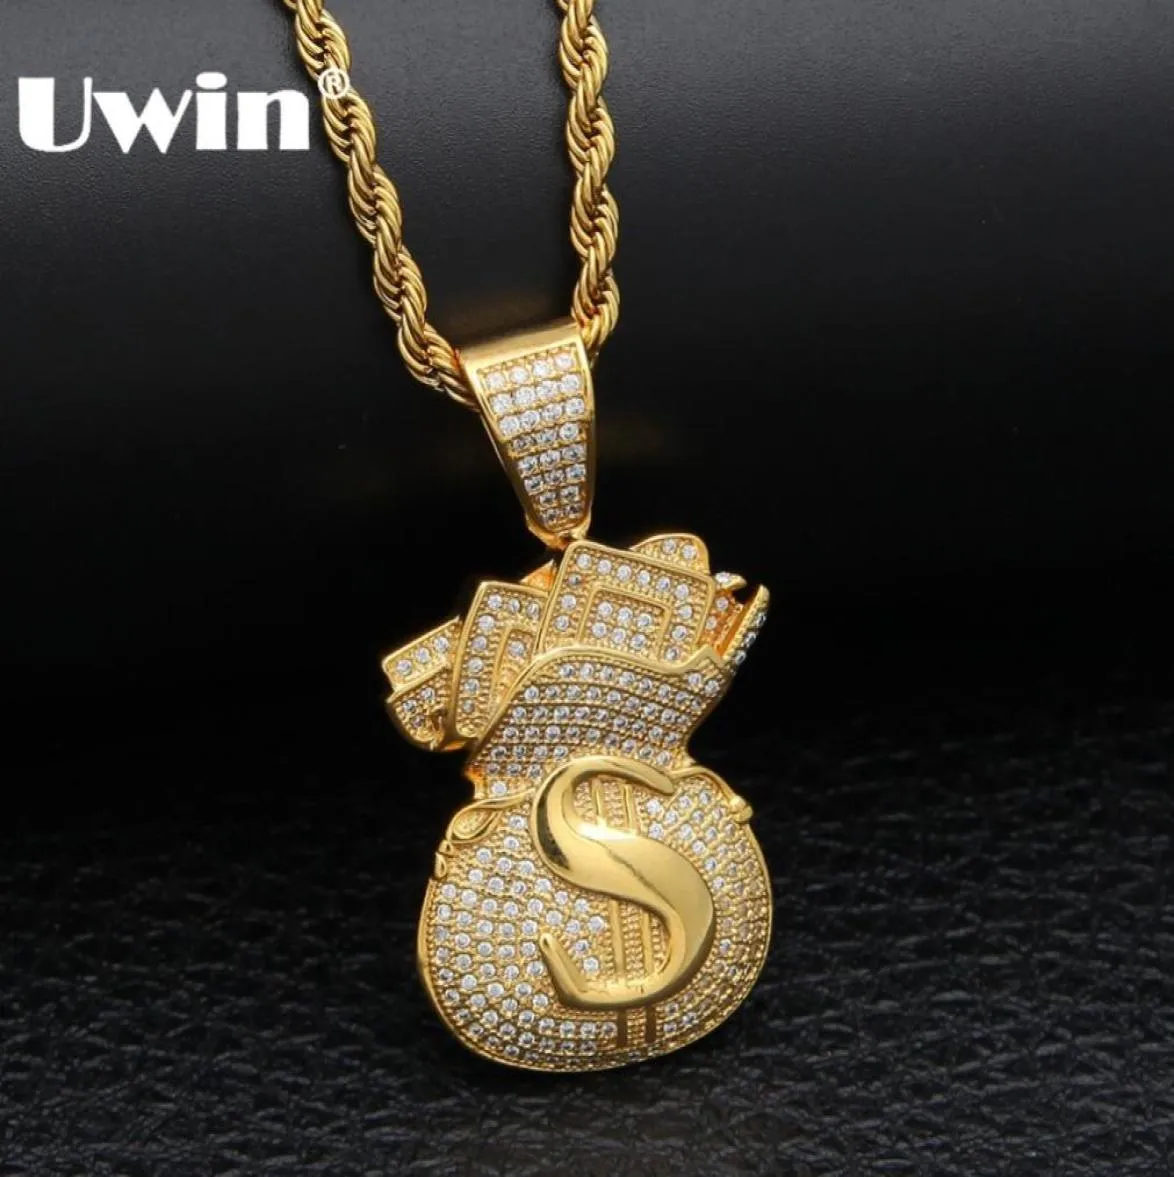 Uwin Us Money Sac Collier Pendant Full Bling Cubic Zirconia Iced Out Gold Chains Silver Gold Color Hiphop Bijoux pour Men1393144